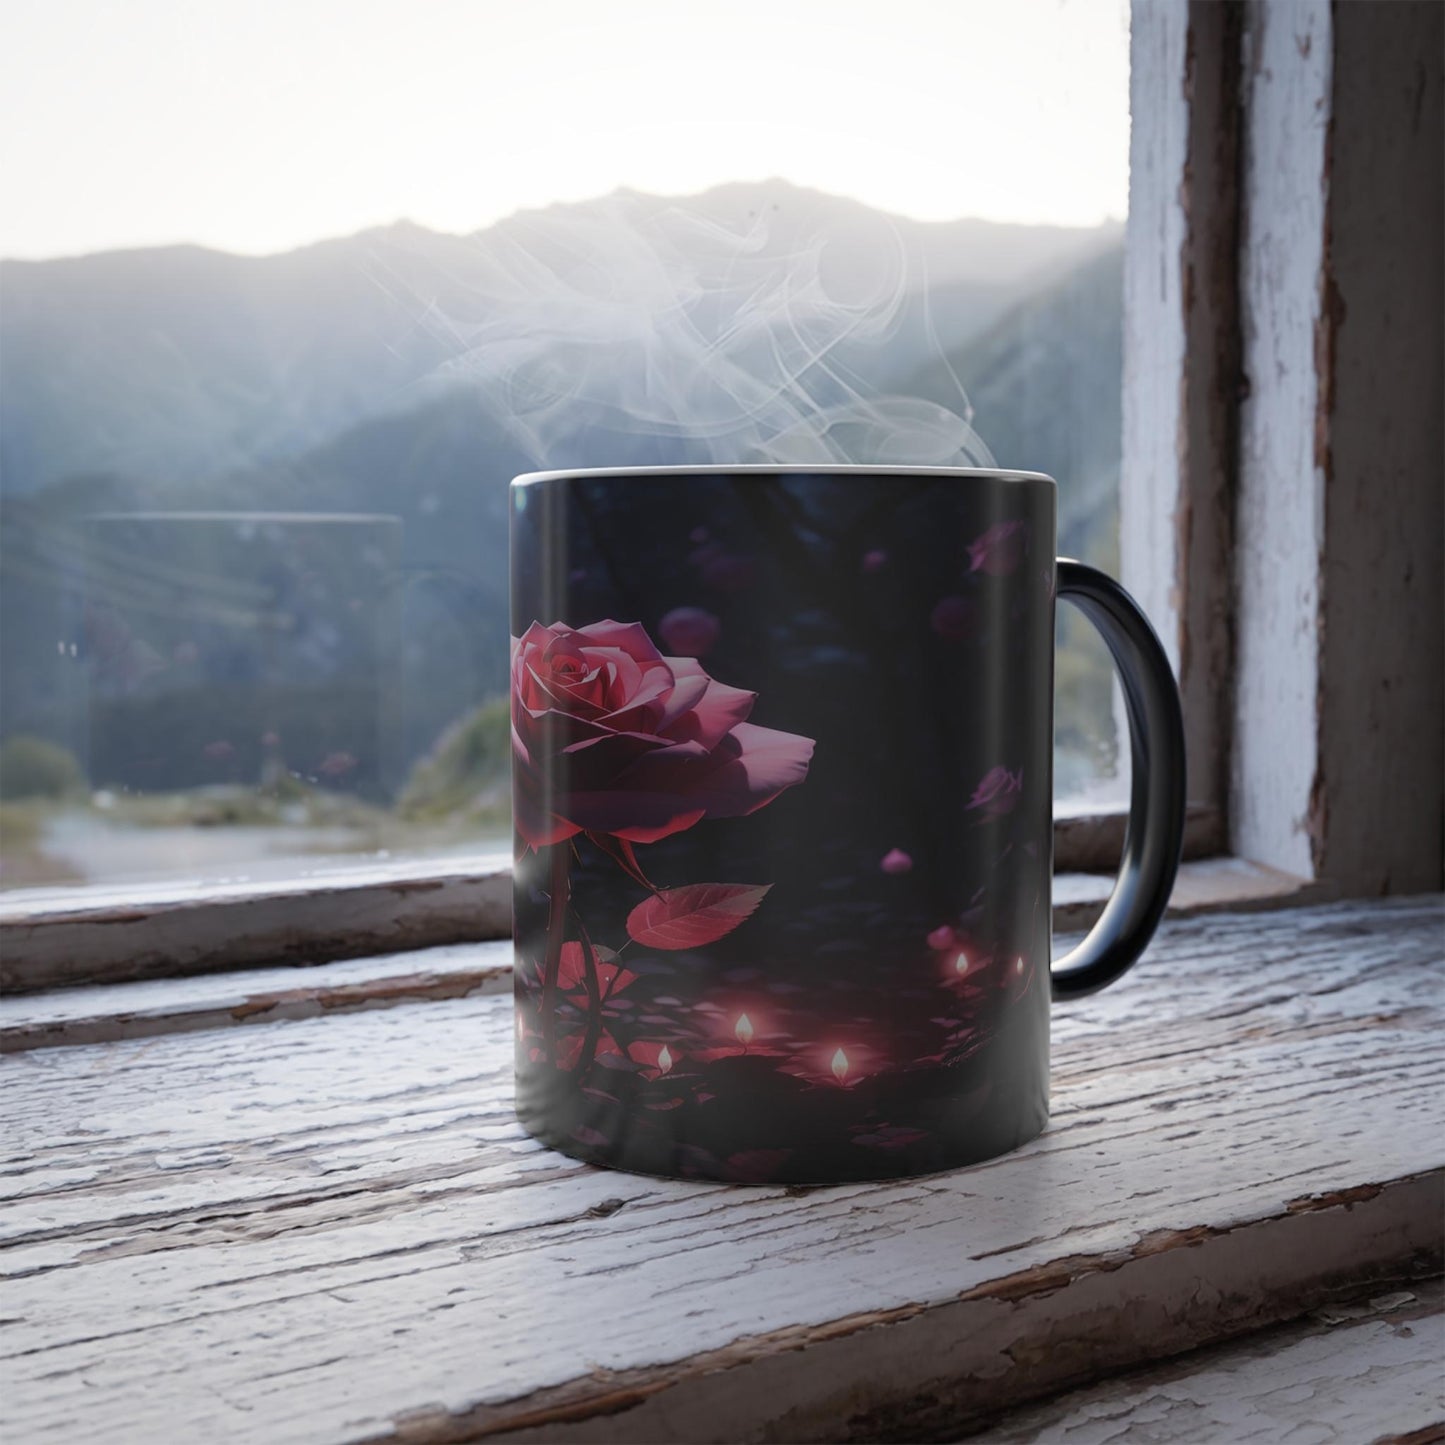 Enchanting Flower Magic Morphing Mug 11oz - Lovely Heat Sensitive Coffee Tea Cup with Flower, Rose, Tree, Heart Designs - Special Gifts for Flower Lovers 7